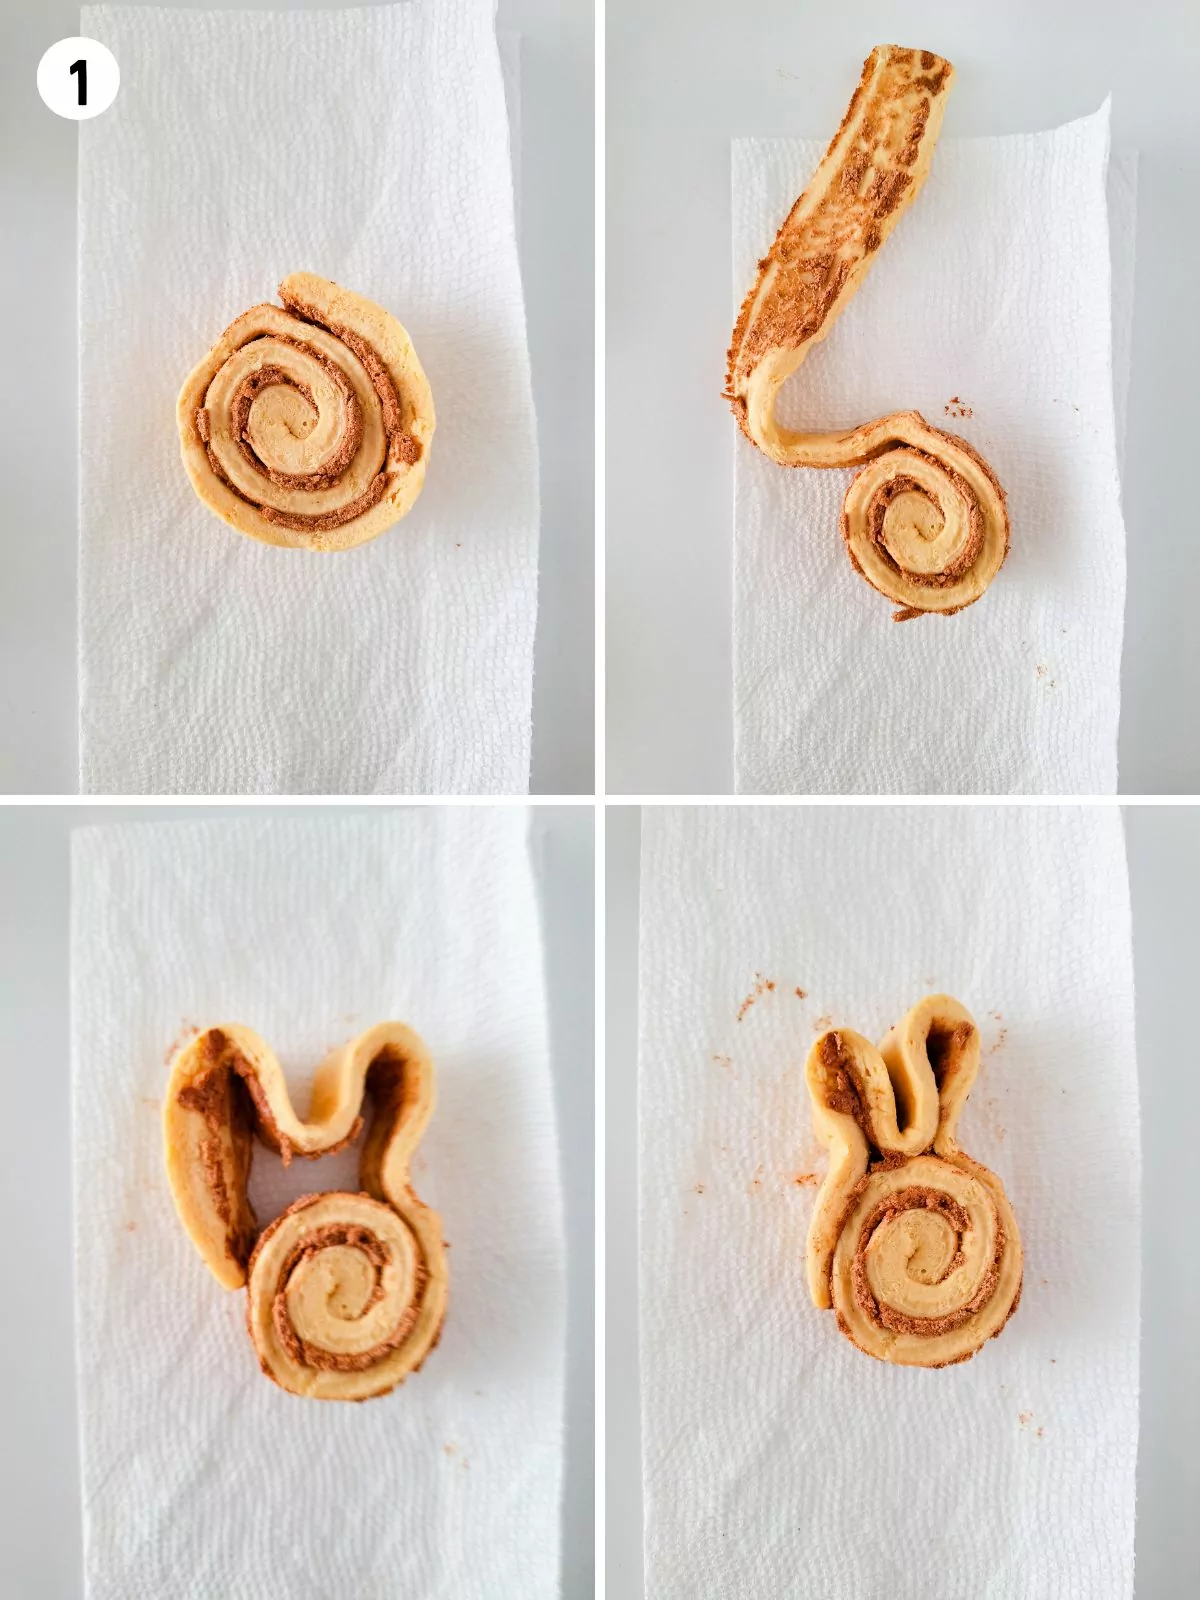 how to shape cinnamon rolls into bunnies for Easter.